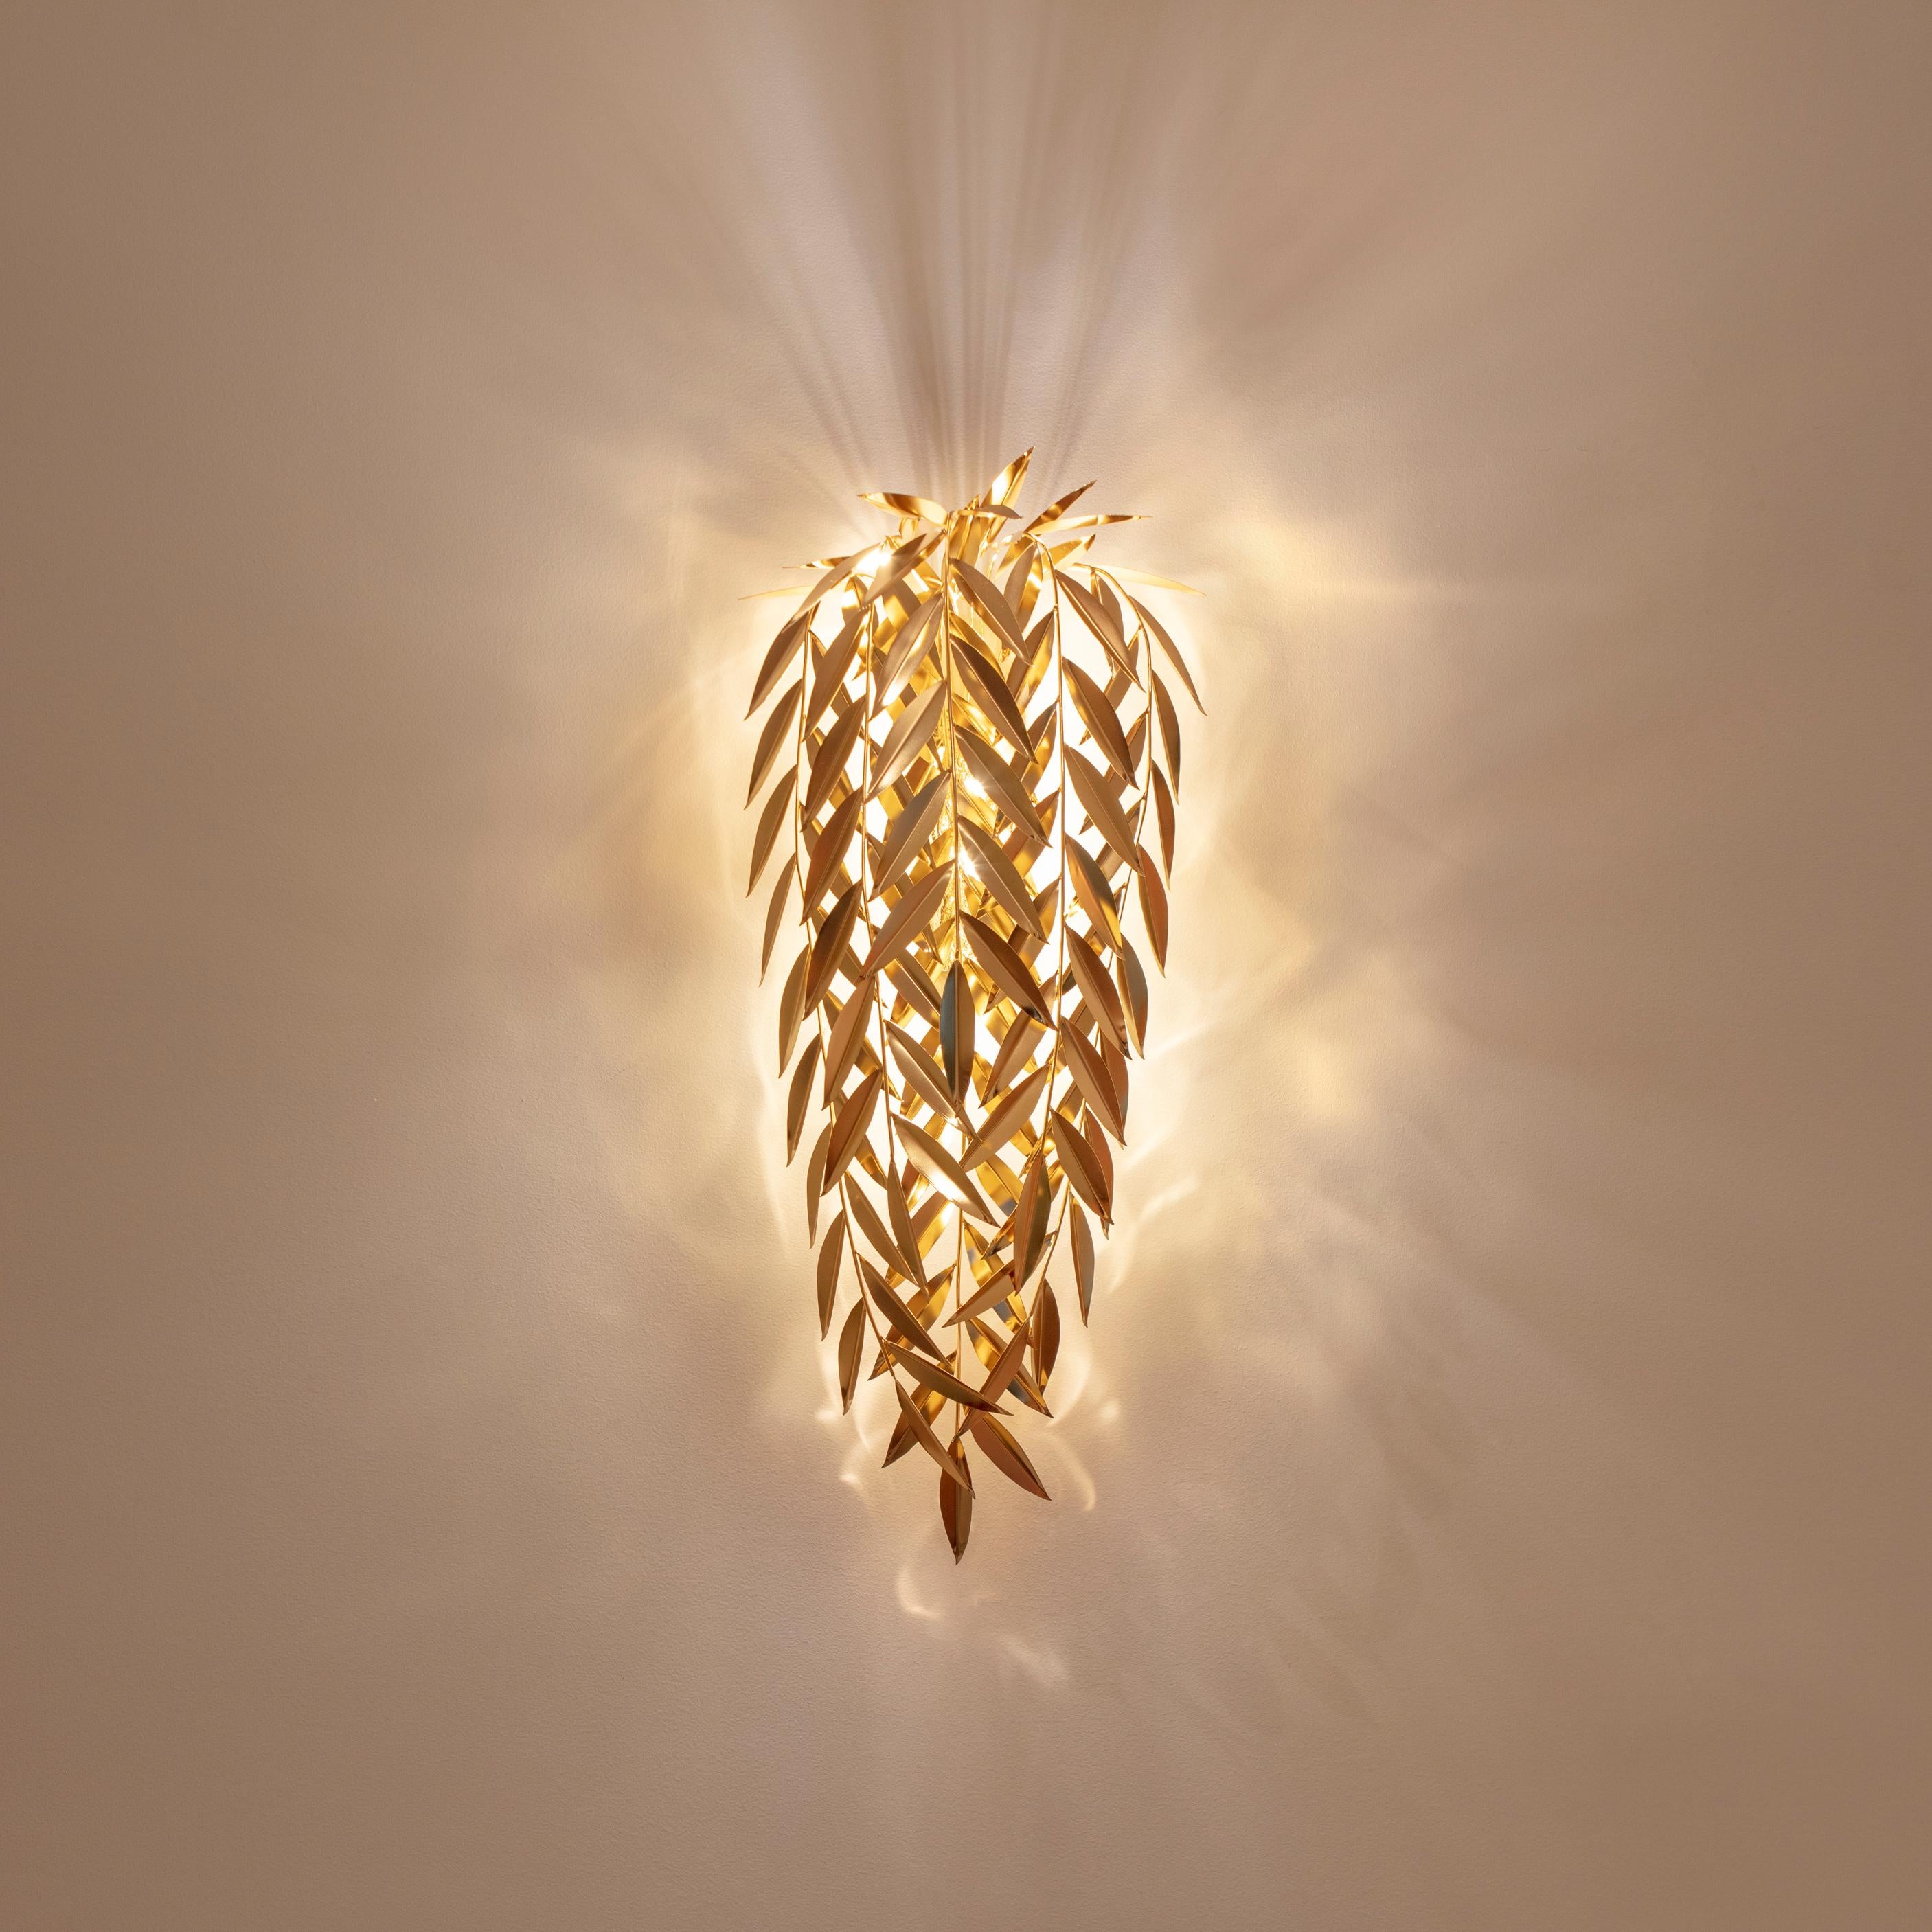 Portuguese Azores Wall Lamp, Polished Gold, InsidherLand by Joana Santos Barbosa For Sale